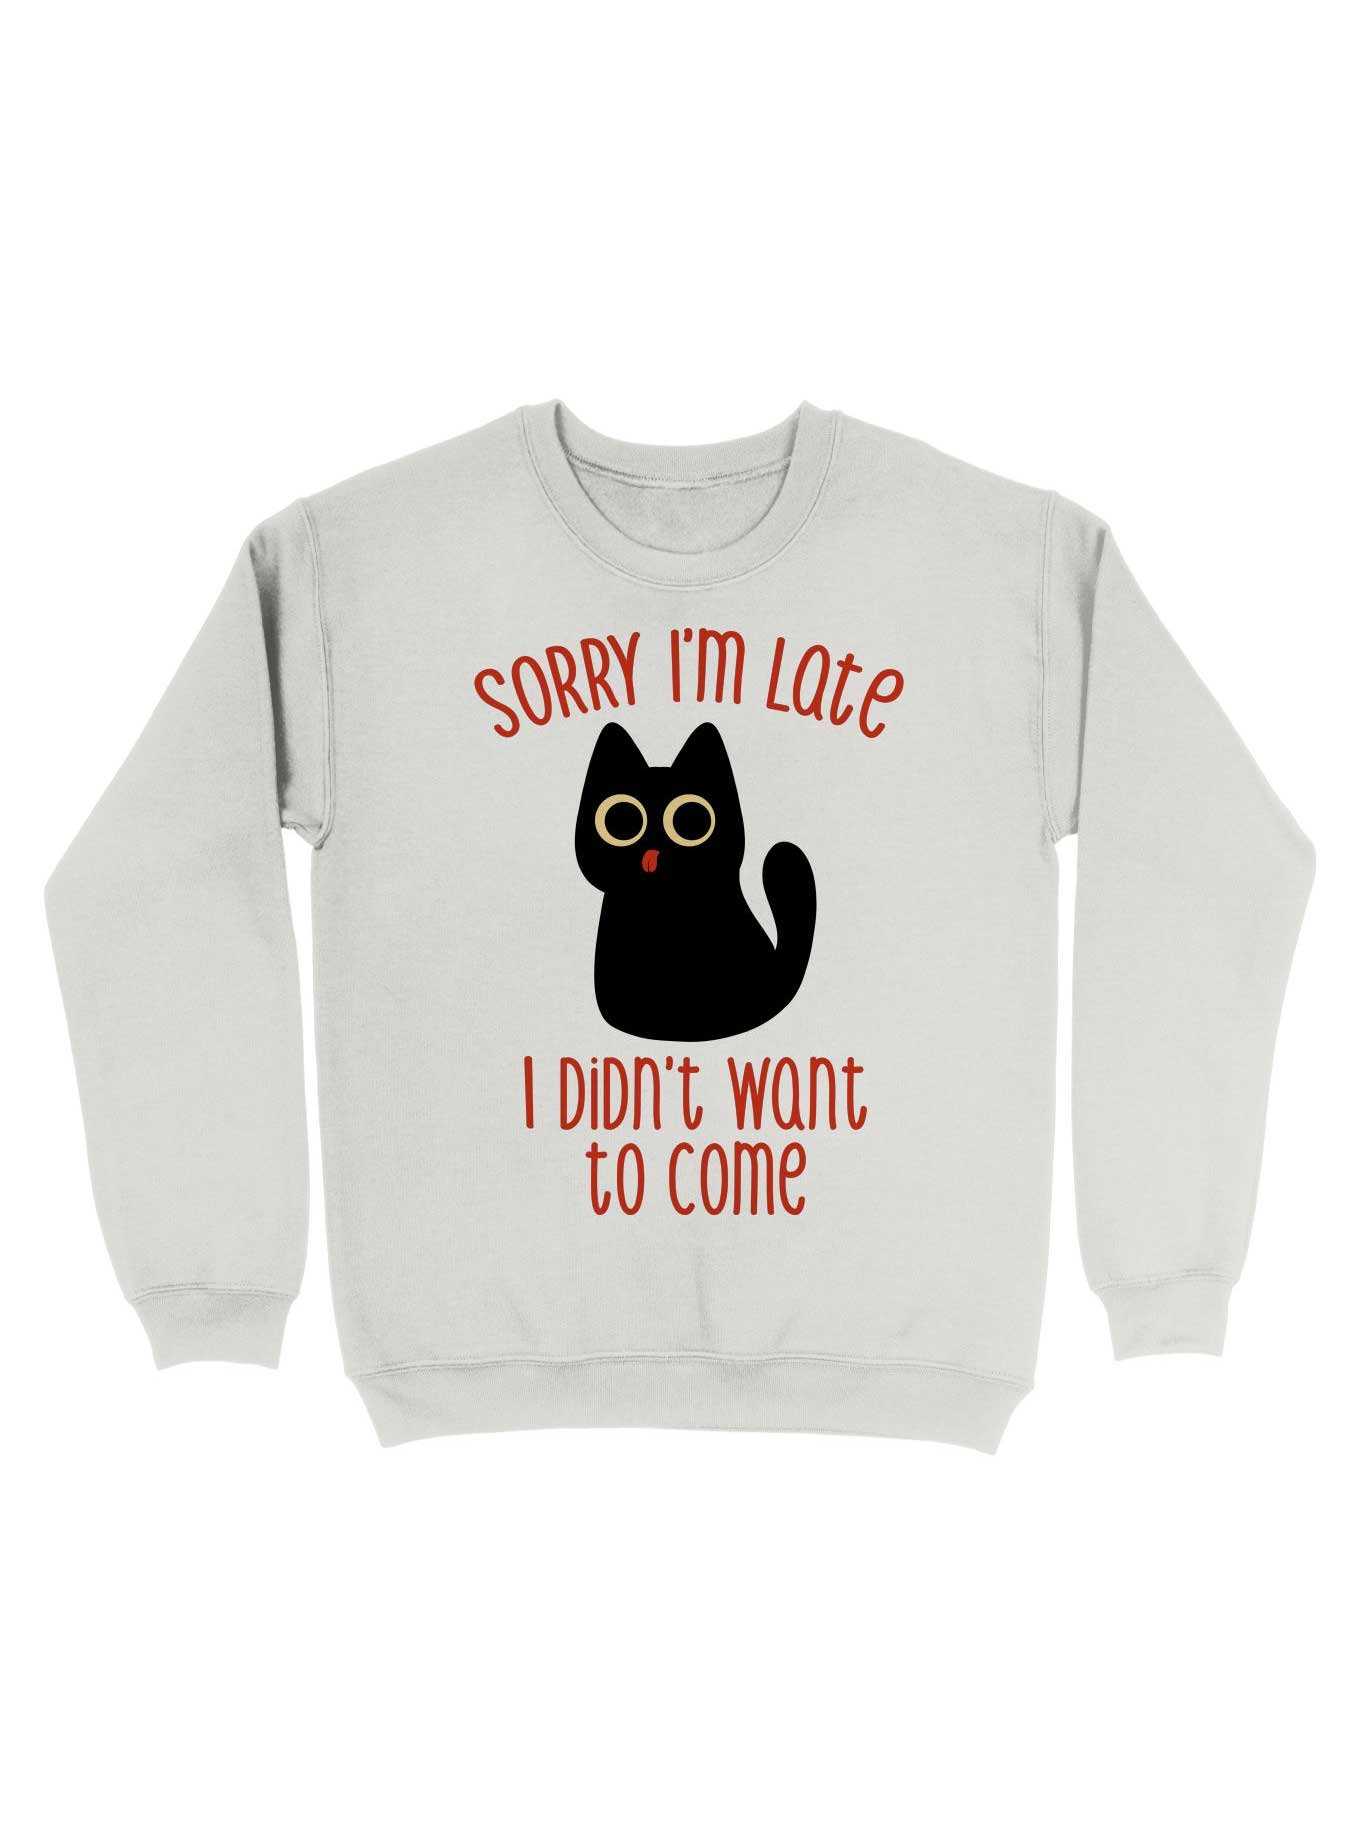 Sorry I'm Late I Didn't Want to Come Black Cat Sweatshirt, , hi-res